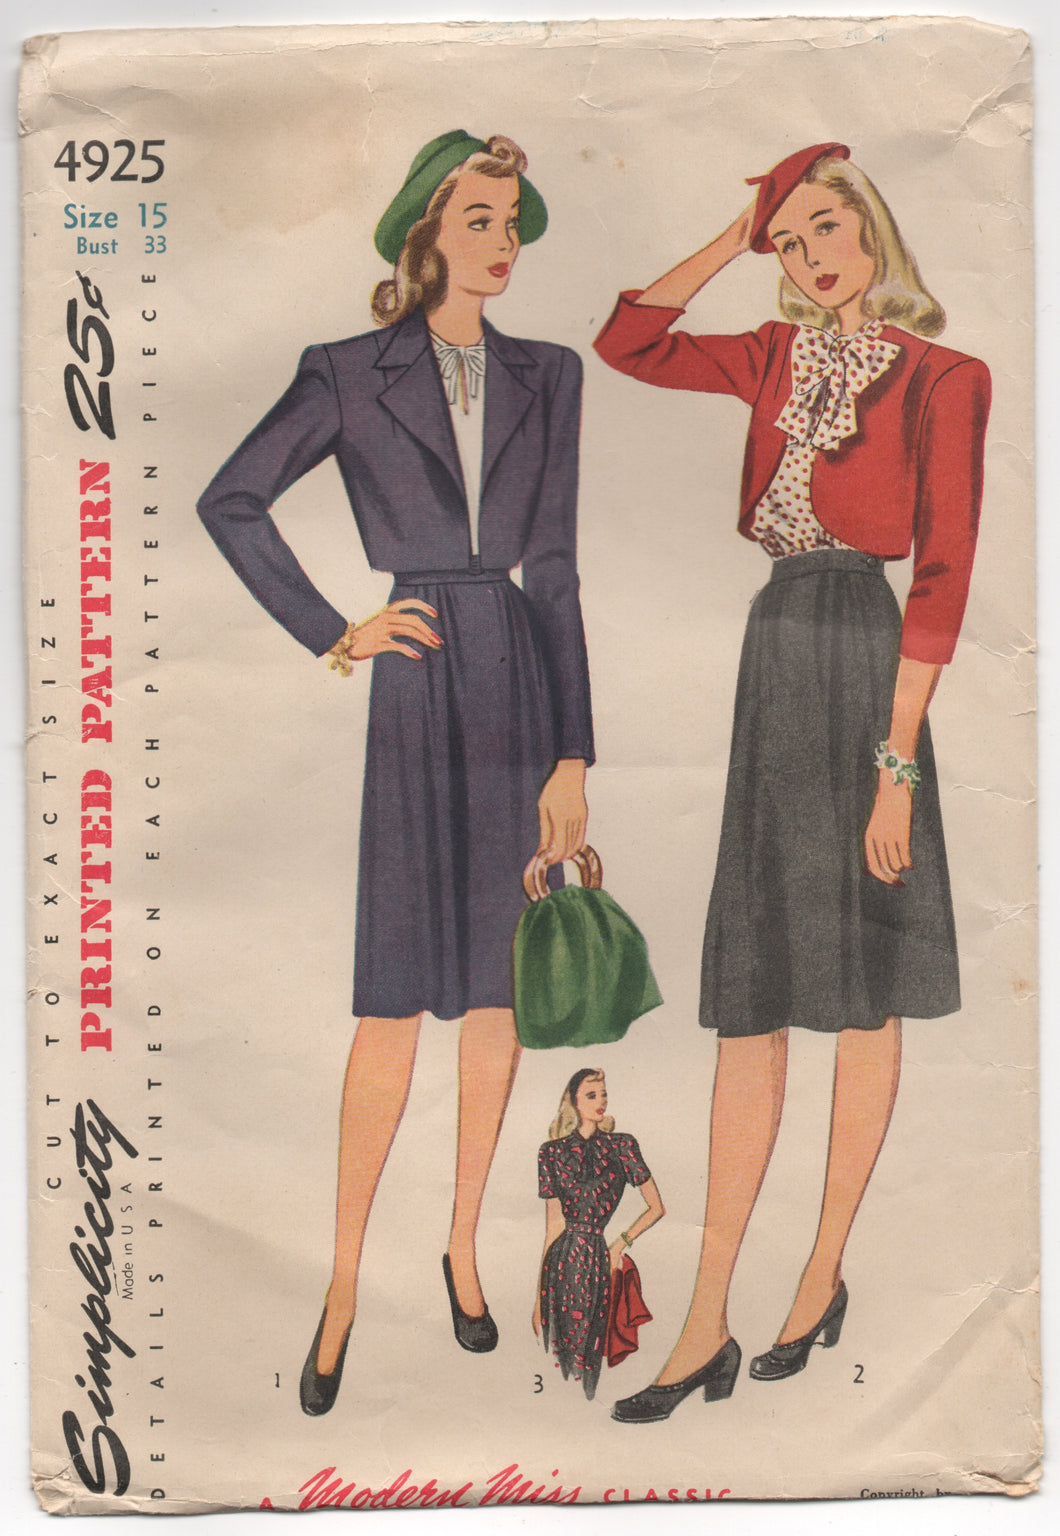 1940's Simplicity Bolero, Blouse with Bow, and A line Skirt - Bust 33